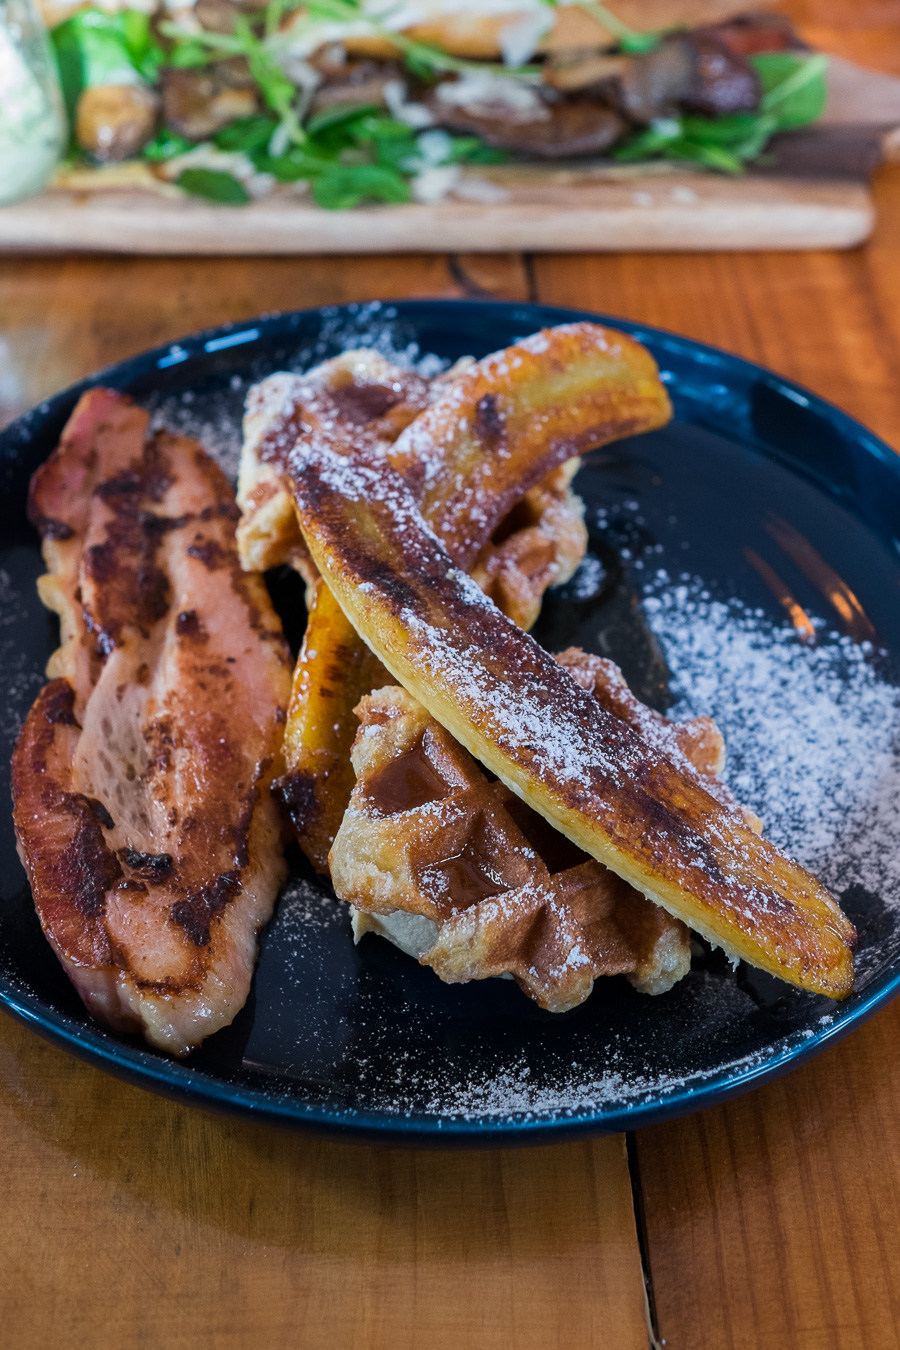 Waffle with caramelised banana and marscapone (medium $12)  with a side of thick cut bacon ($5)